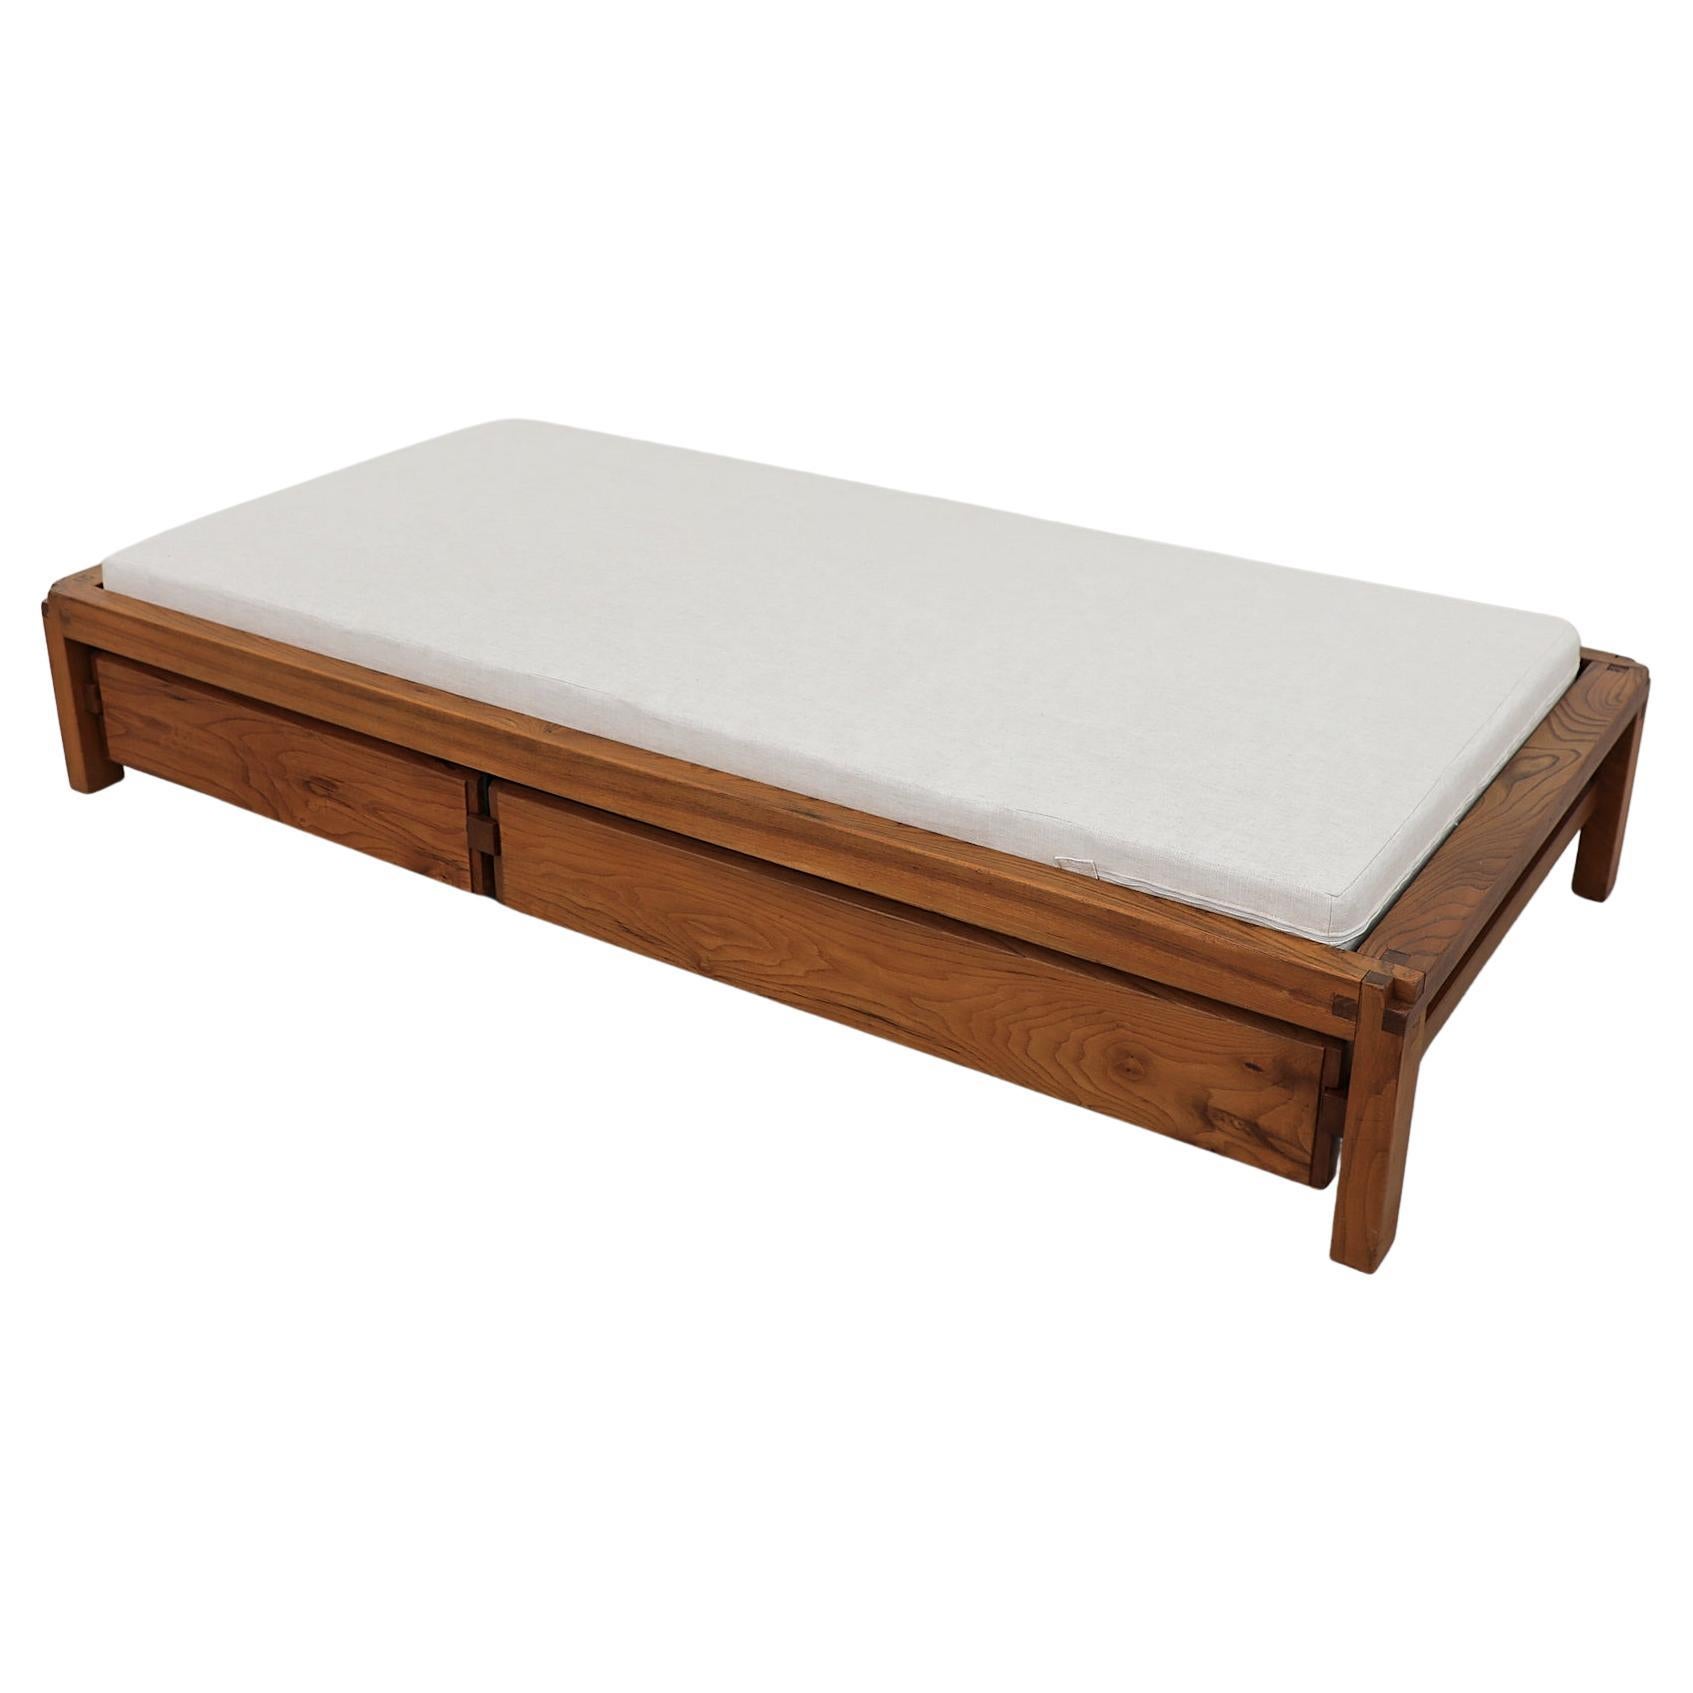 Pierre Chapo 'L03' Daybed in Elm with Storage & Newly Made Mattress, 1960s For Sale